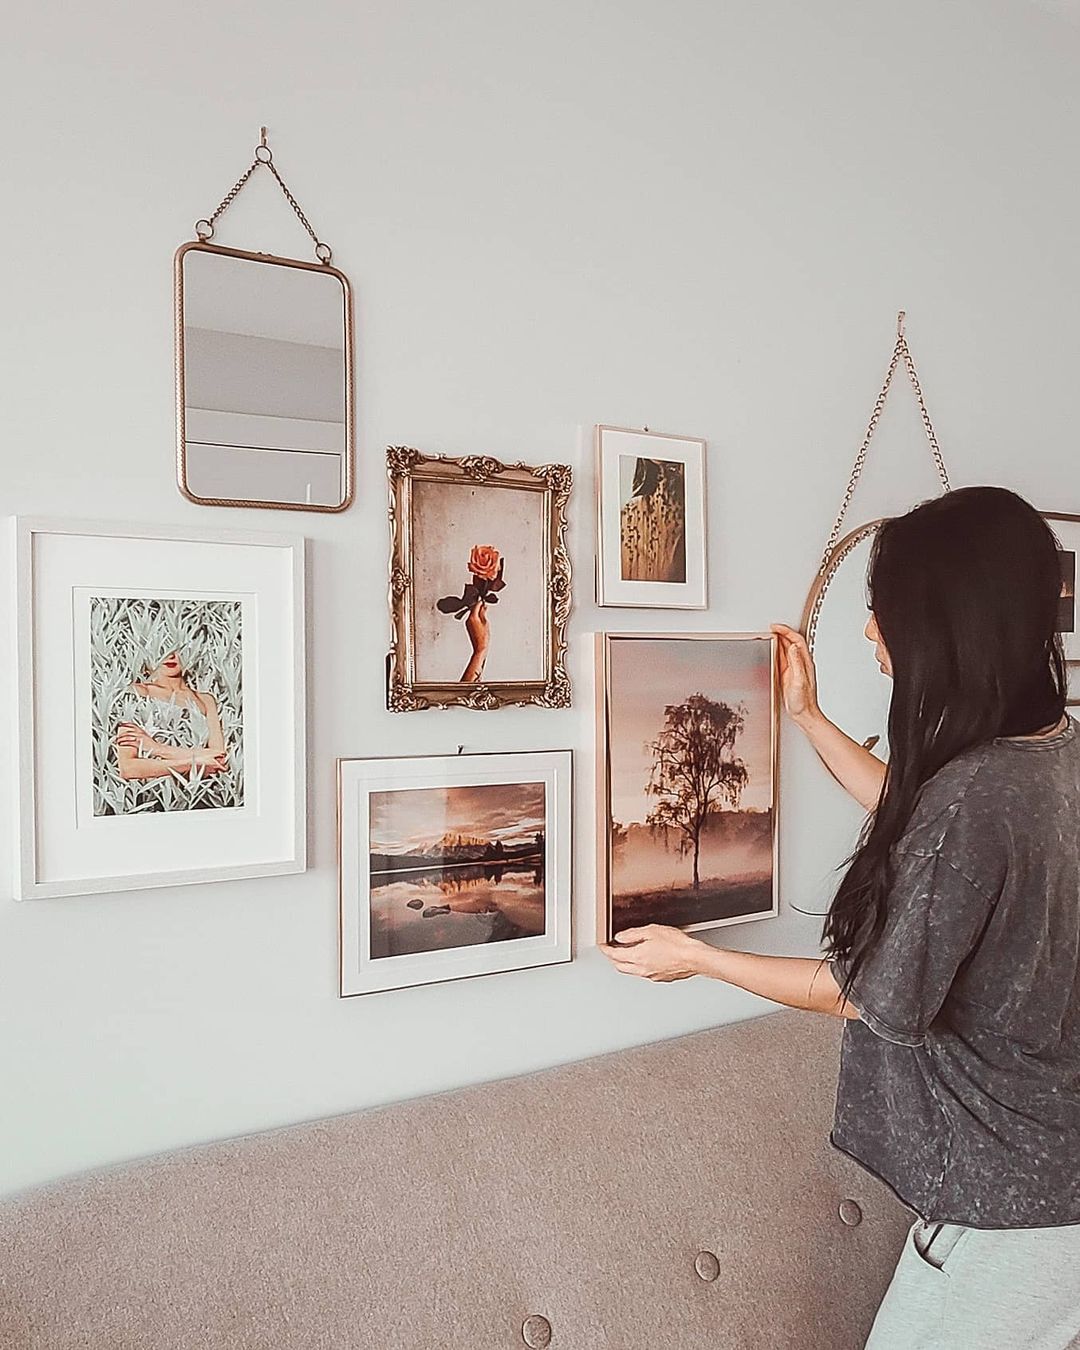 10 Gallery Wall Layouts That Will Transform Your Space! - Driven